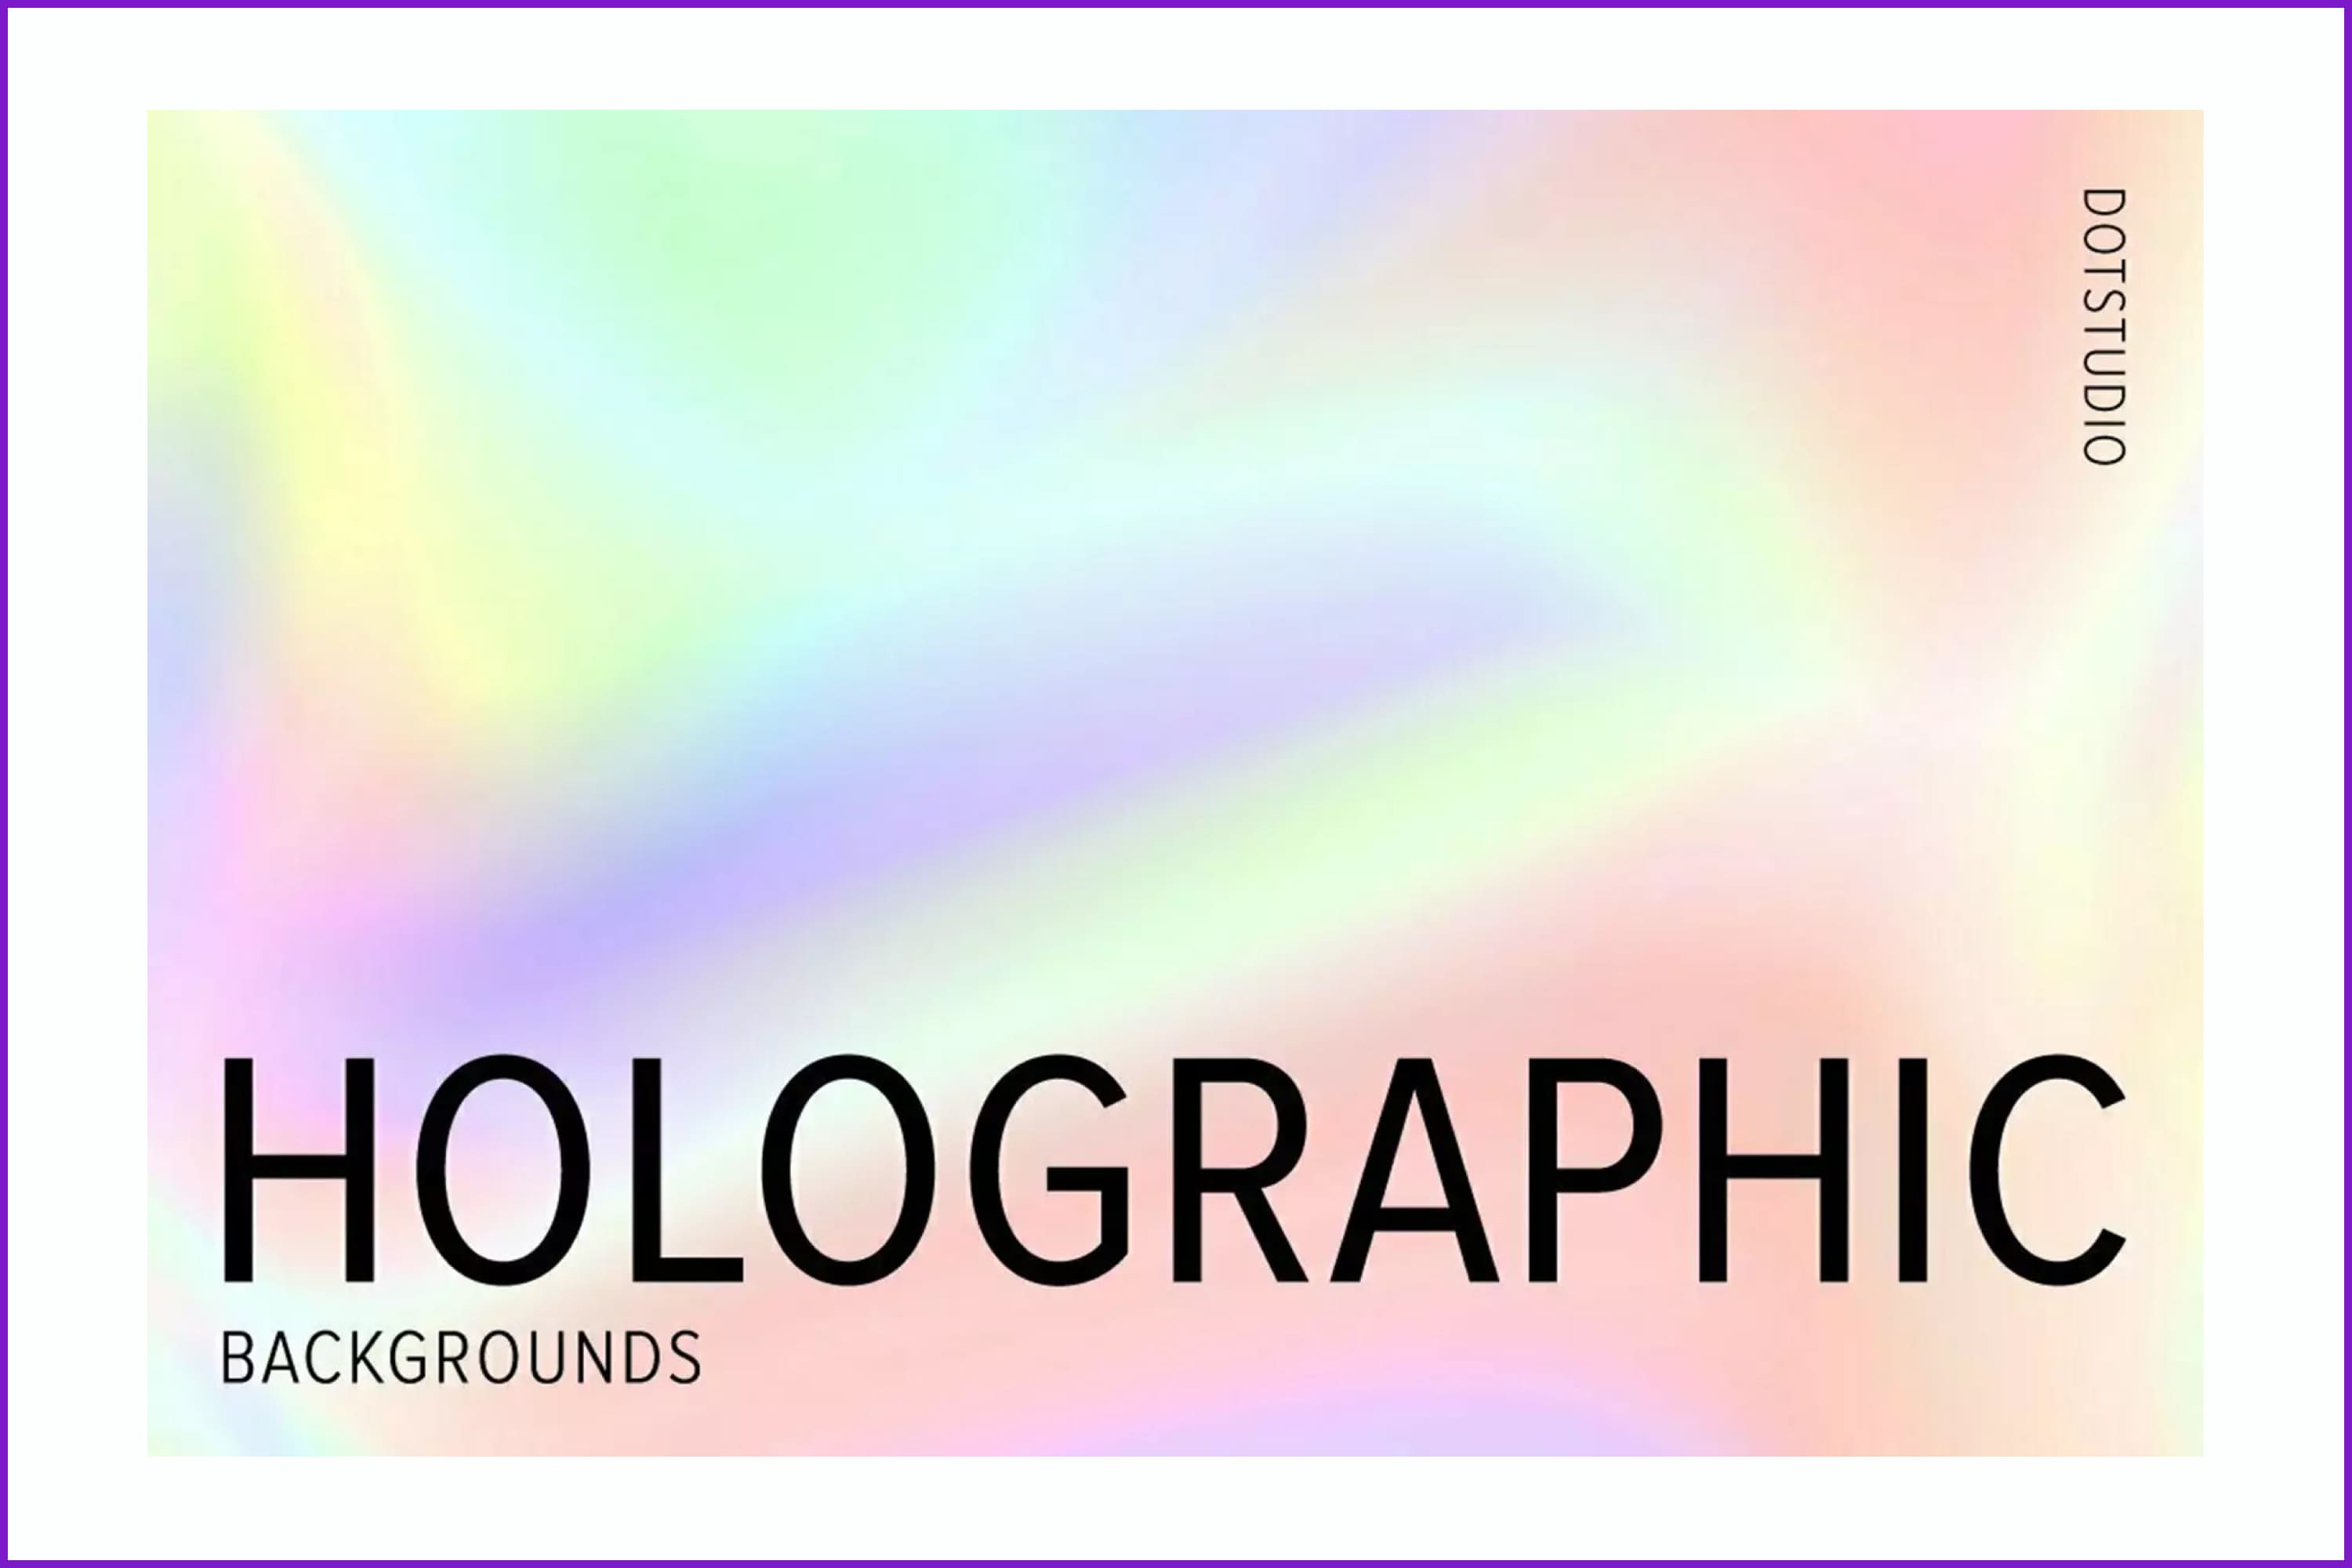 Colorful Holographic Background with black text.